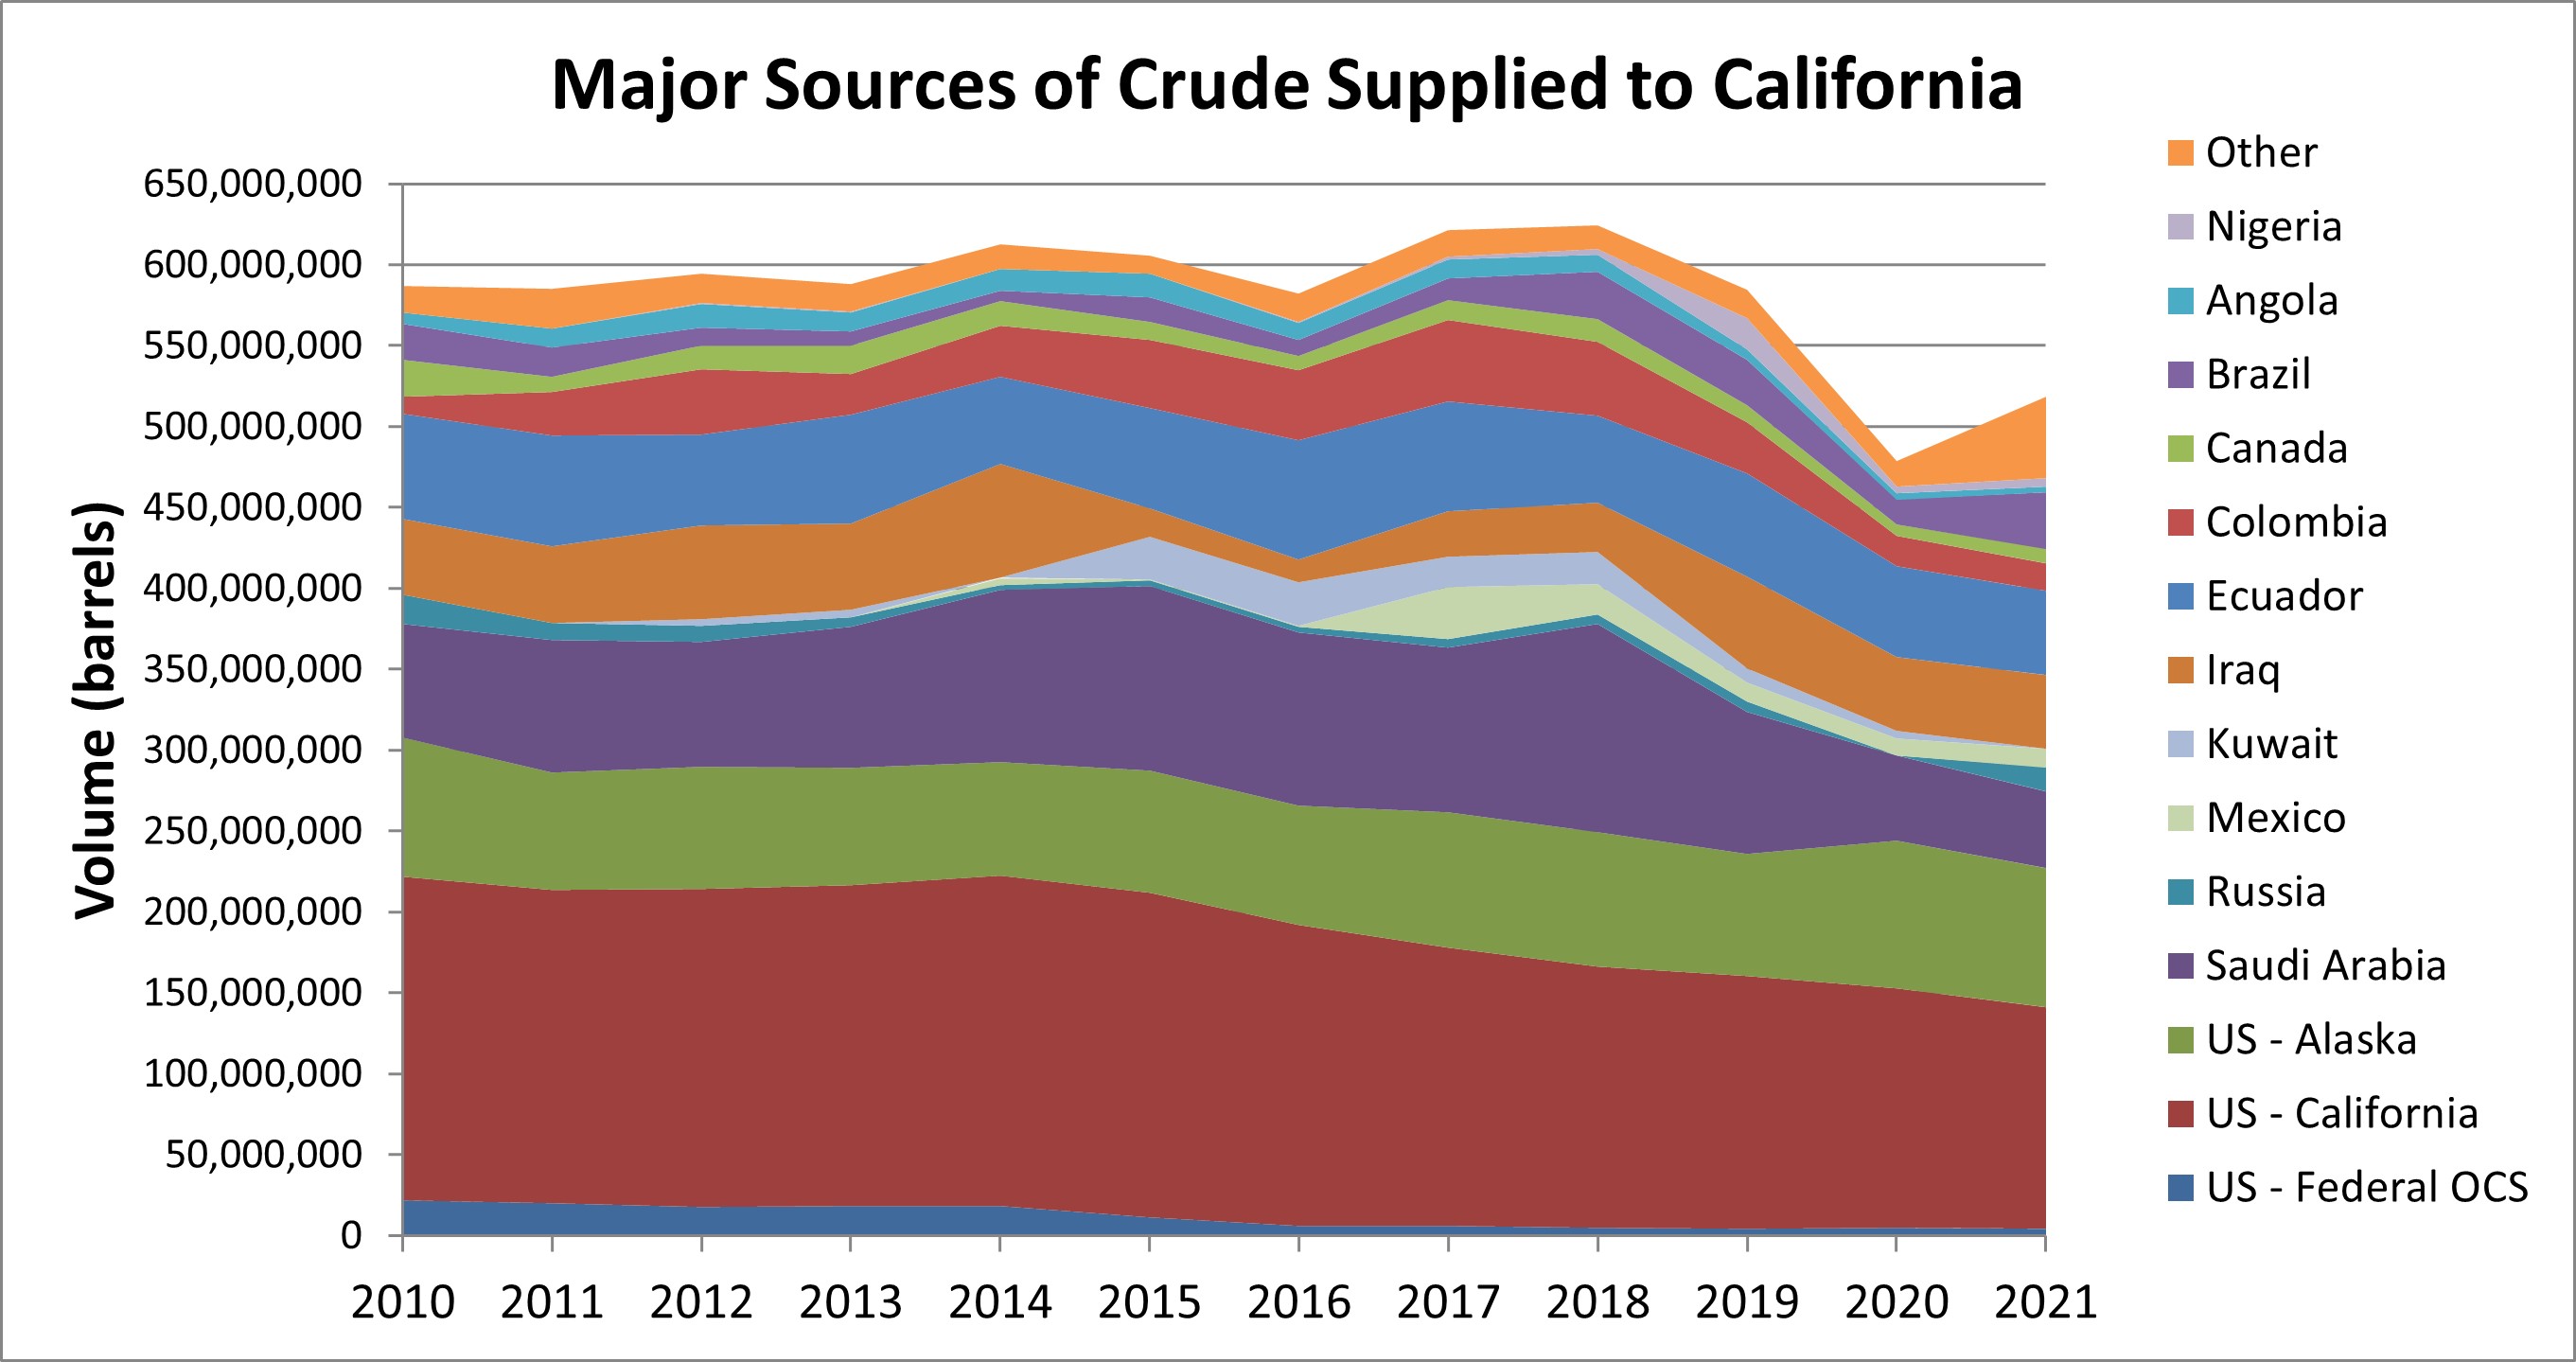 This figure depicts the major sources of crude oil supplied to California Refineries from 2010 to 2021. Crude oil from California, Alaska, and 11 countries account for over 90 percent of the volume supplied to California in any given year.